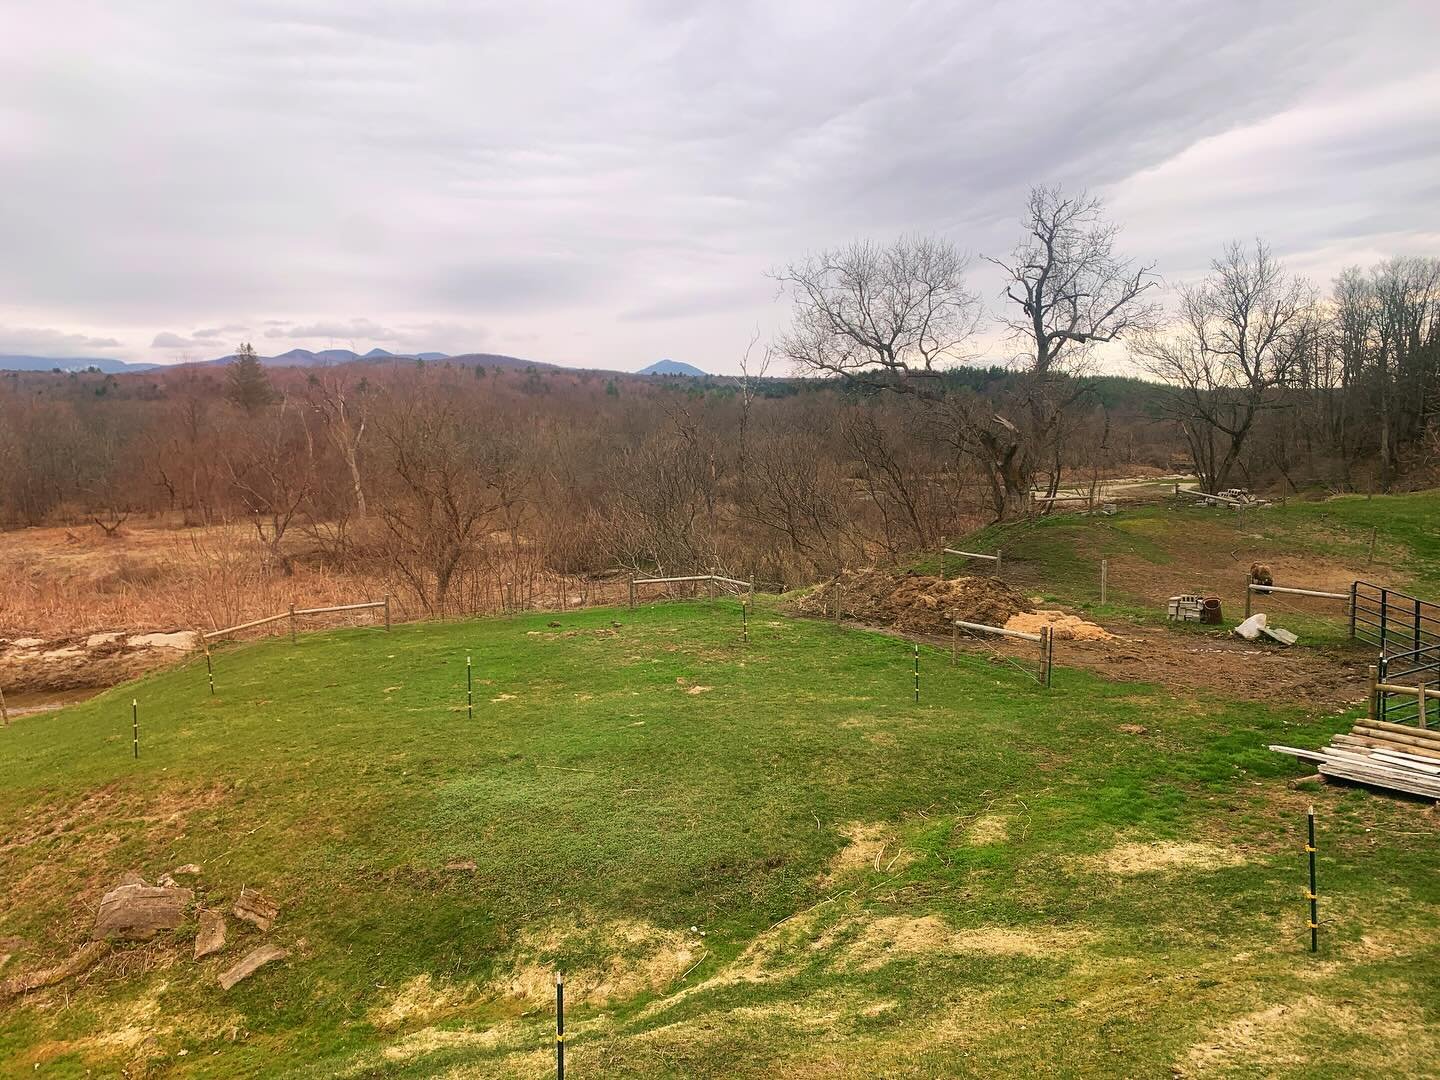 #mymorningview in Stowe, relishing the view over coffee as I contemplate my last training week for Dialogue Therapy for Couples with Jungian analyst &amp; Zen Buddhist, Polly Young-Eisendrath. #couplestherapy #love #equanimity #mindfulness #projectio